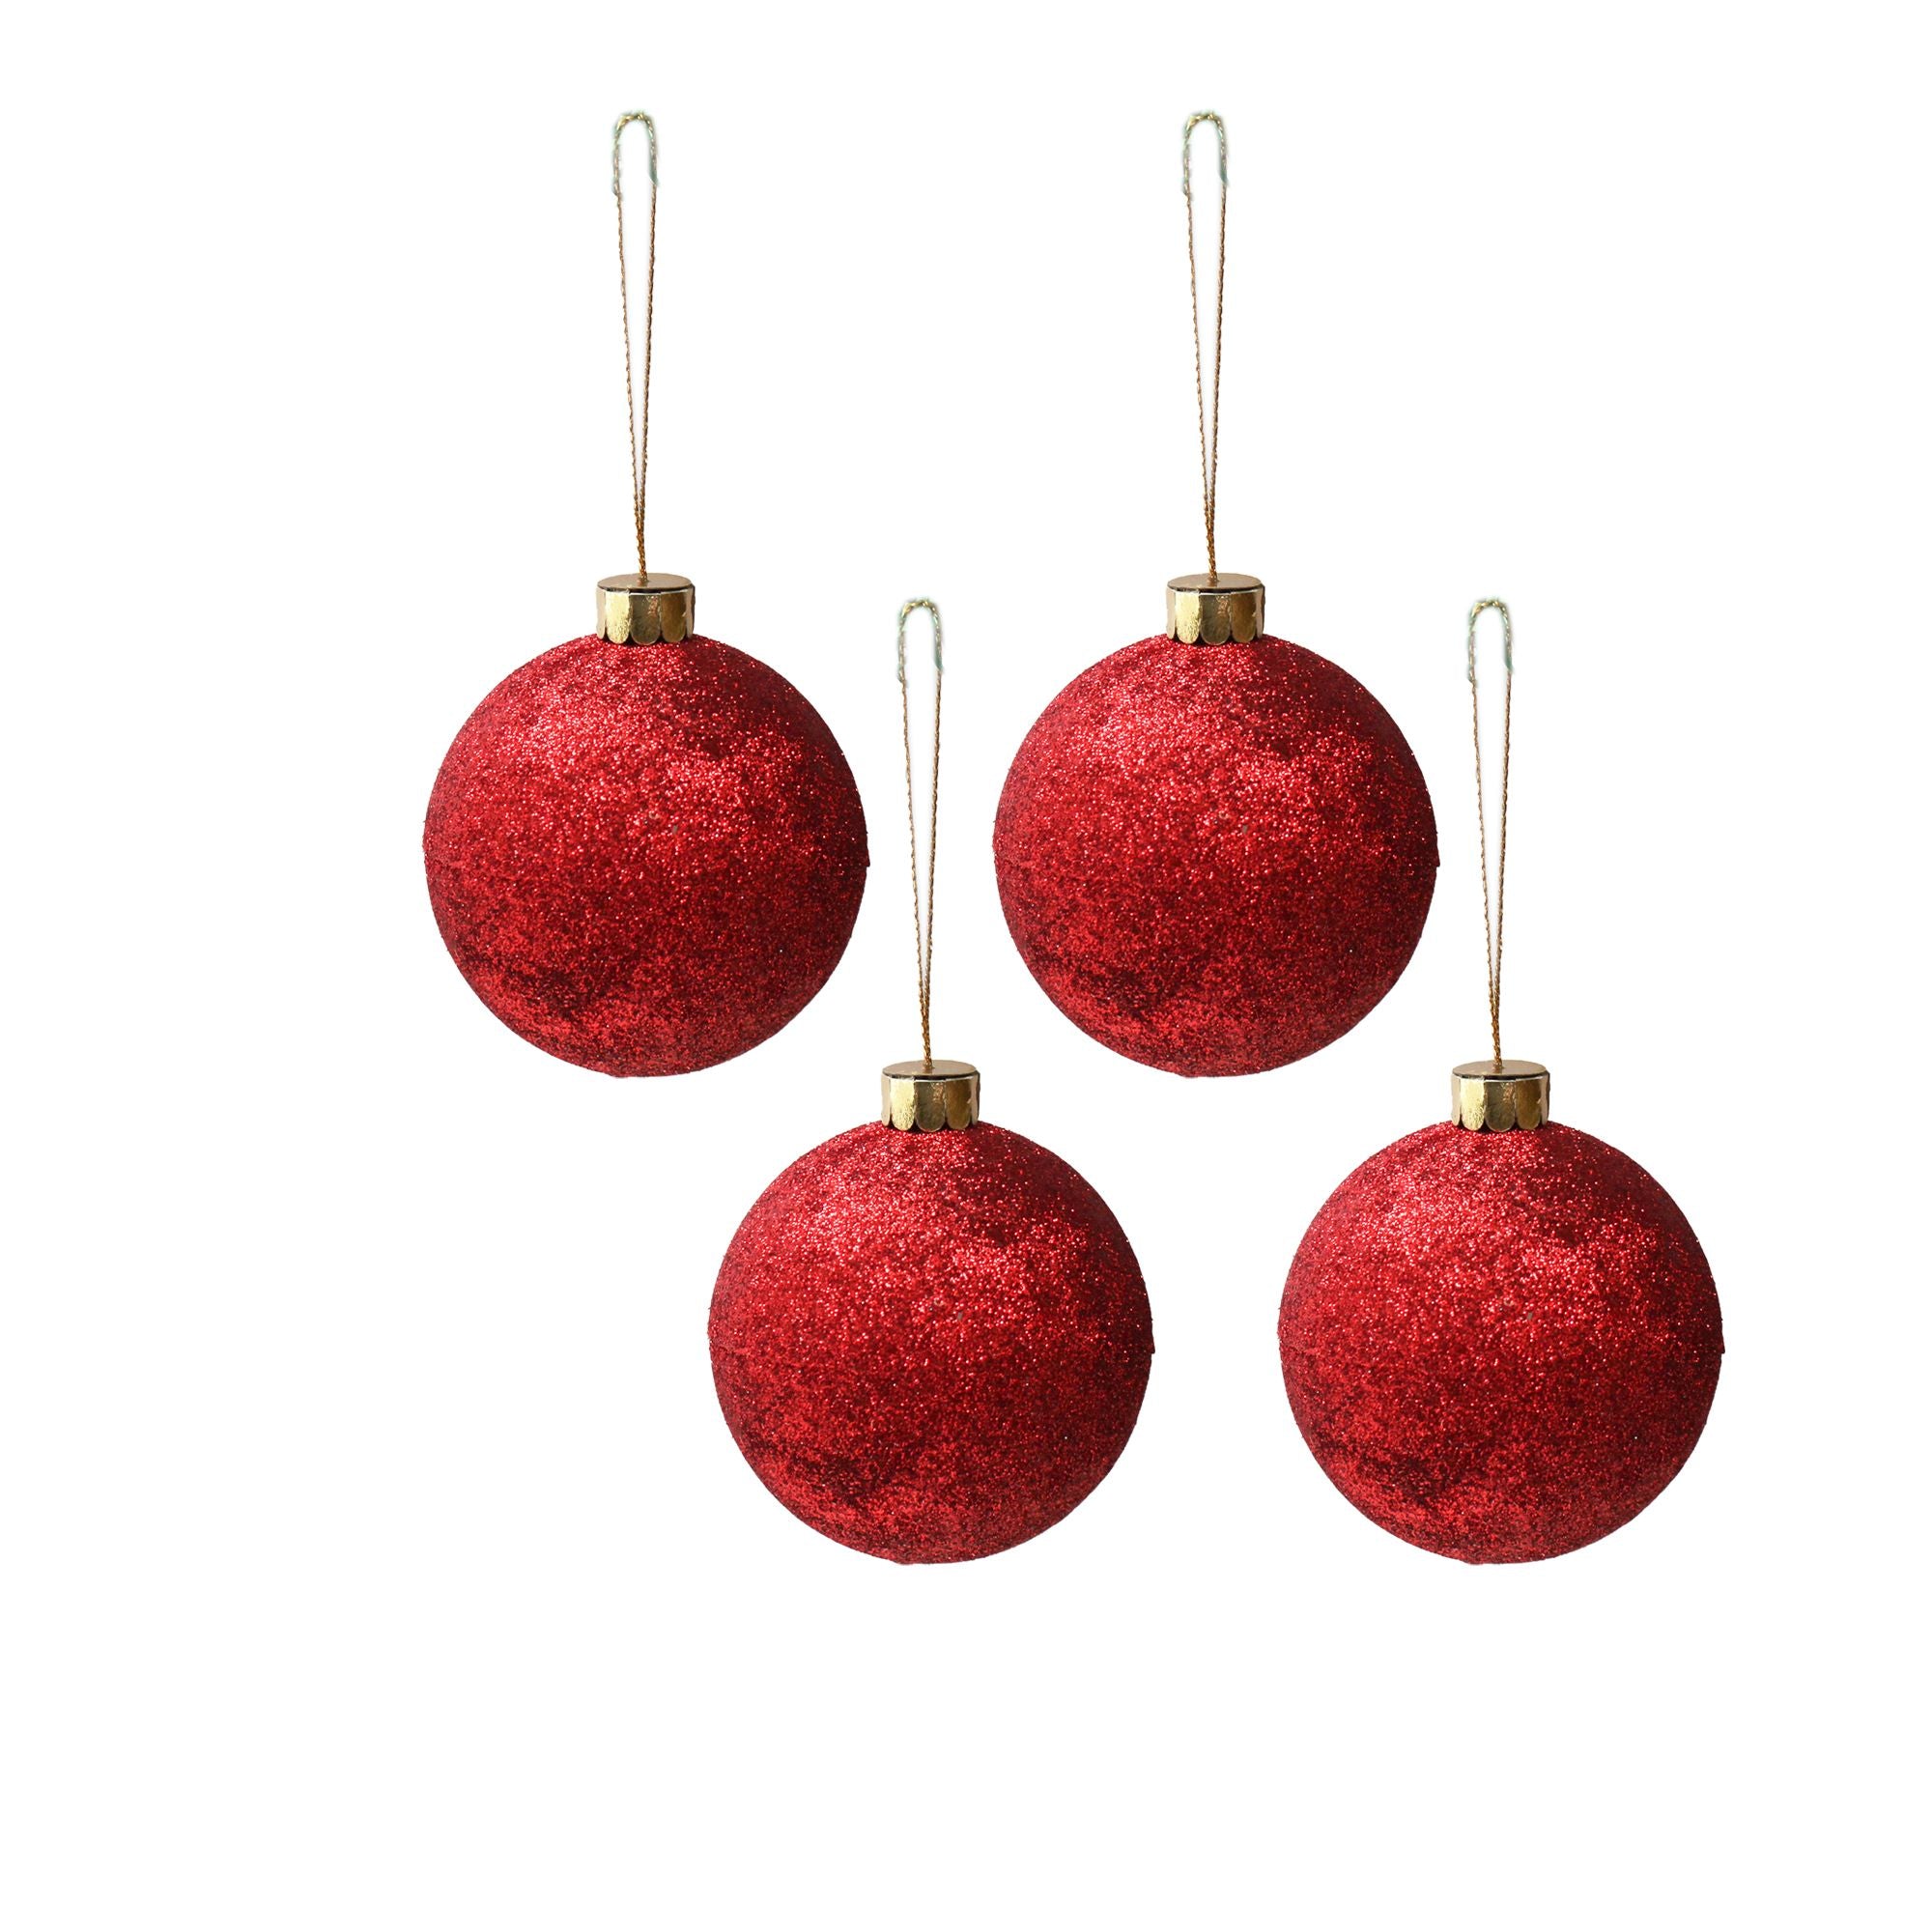 Handmade Christmas Ornaments - Glitter Baubles, 70mm, Red, 4pc